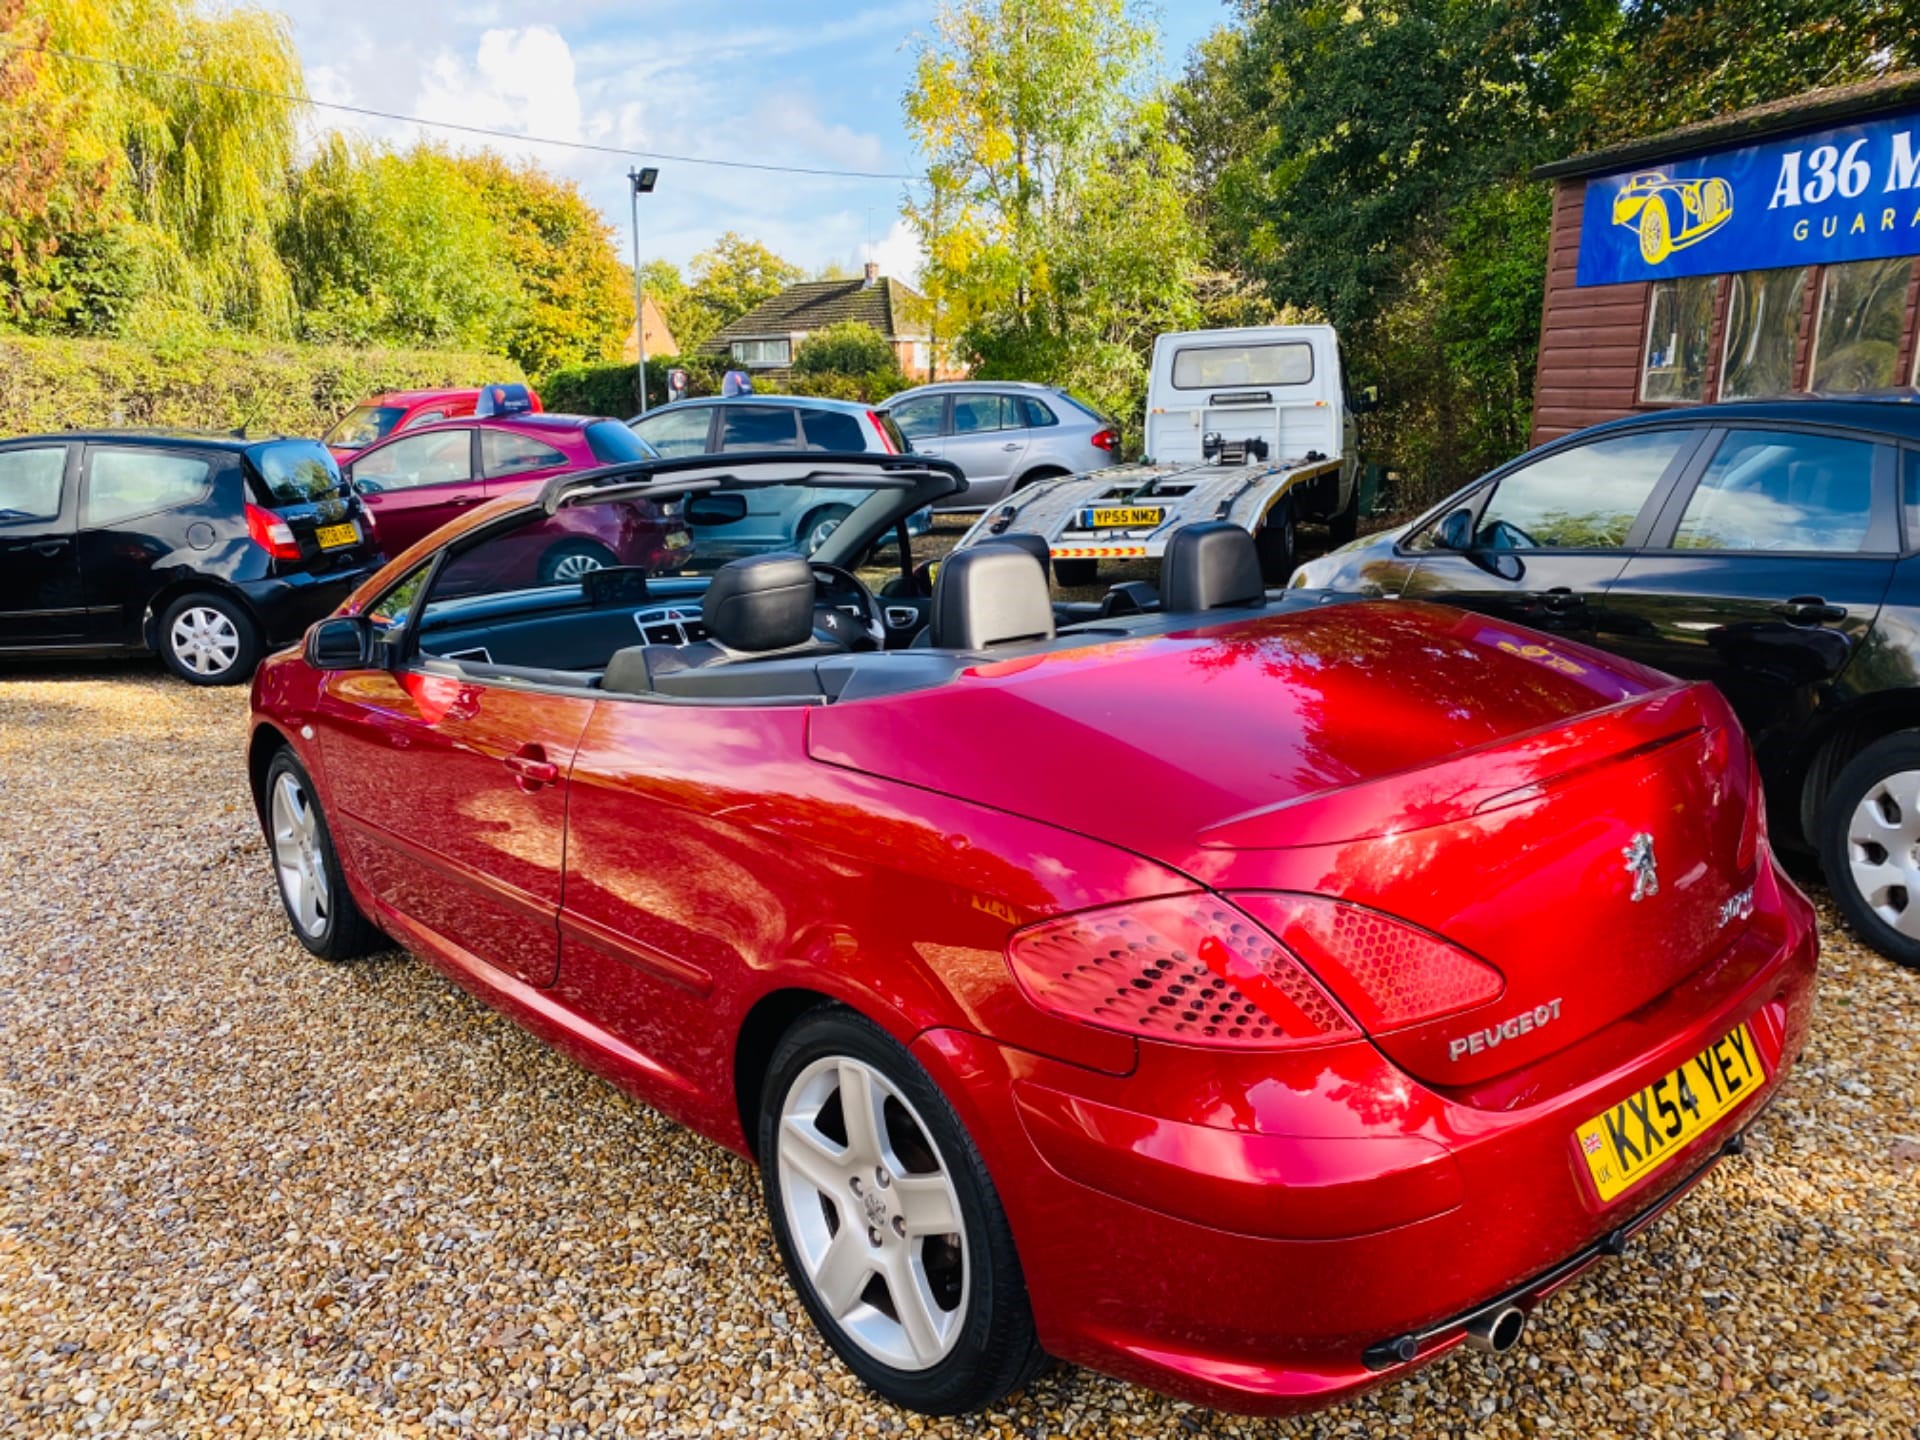 Used Peugeot 307 CC for sale in Landford, Salisbury, Wiltshire